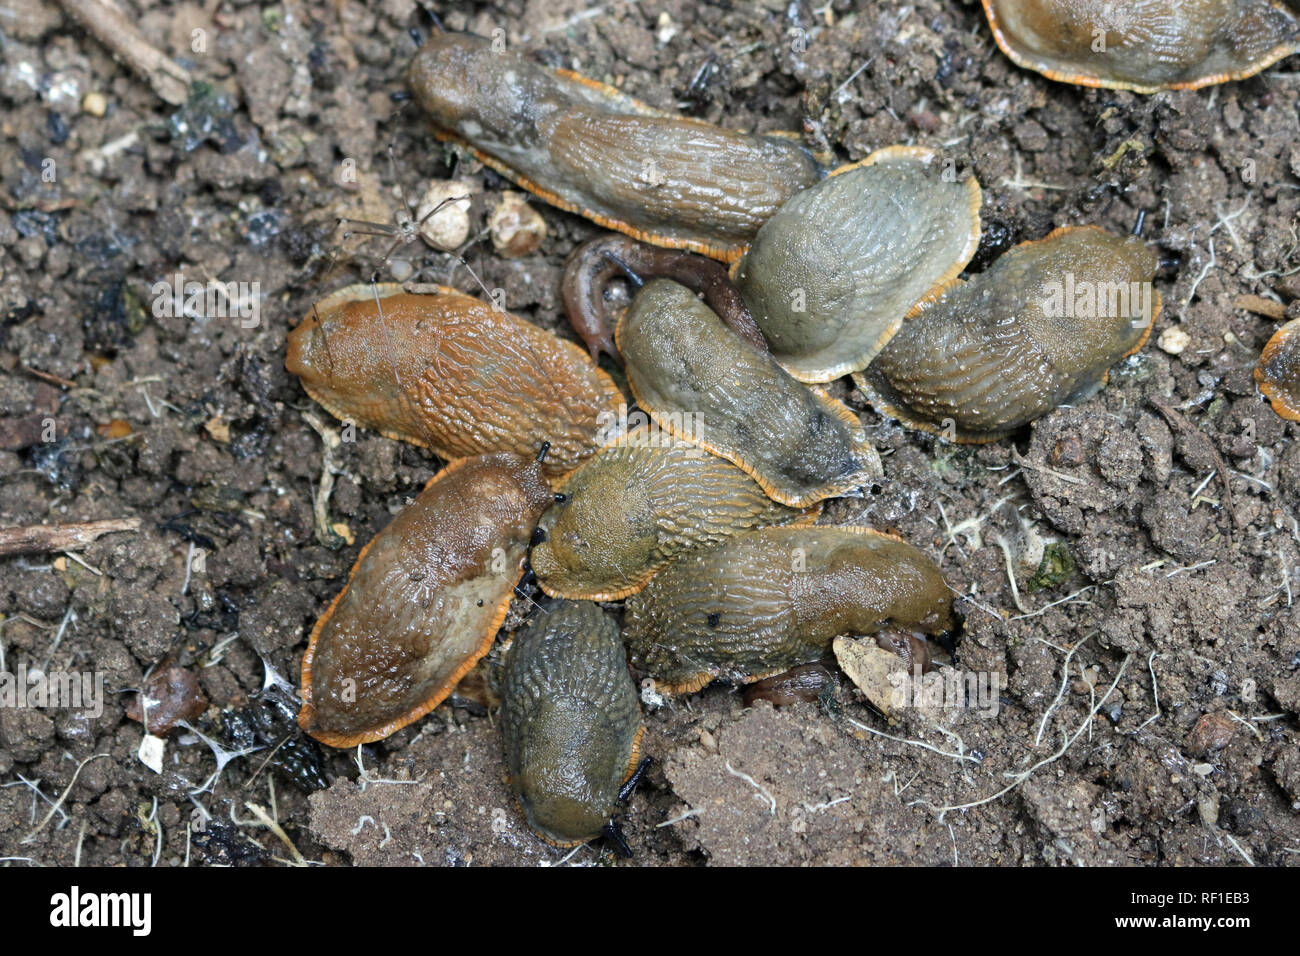 A group of mostly large black slugs, Arion ater, exposed after removing a flower pot with a background of soil. Stock Photo